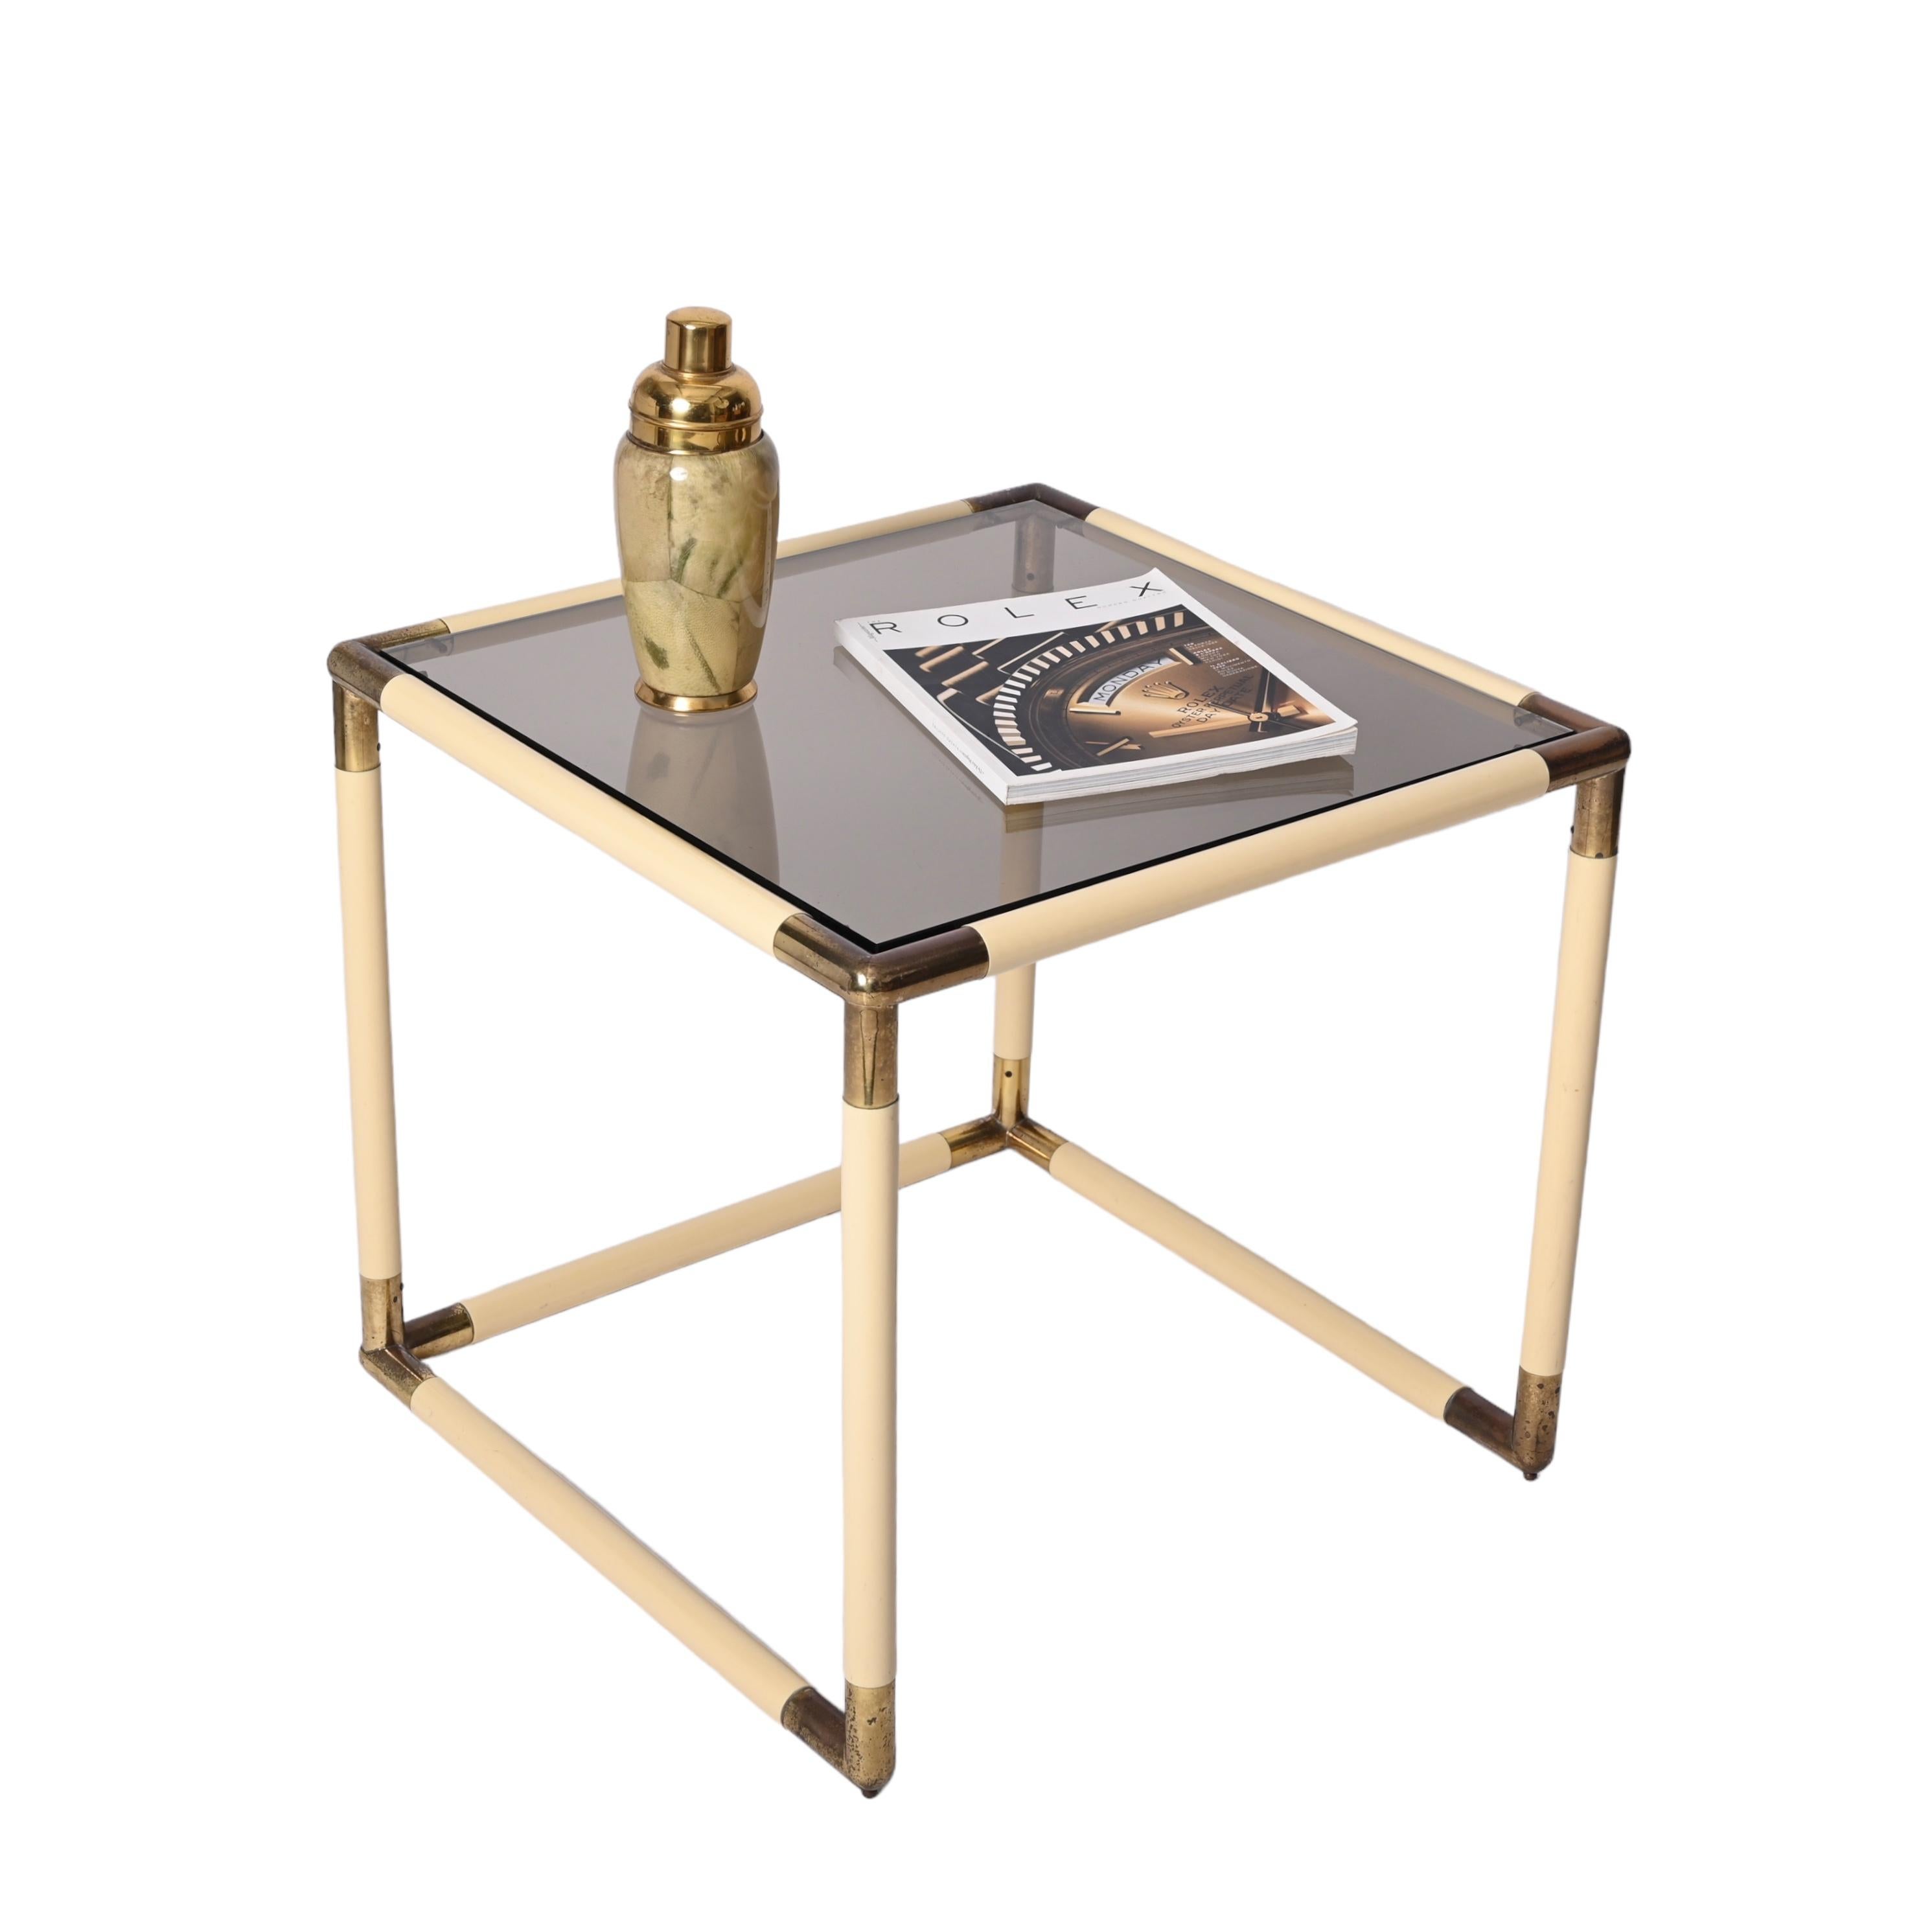 Italian Tommaso Barbi Brass and Cream Enameled Metal Square Coffee Table, Italy, 1970s For Sale